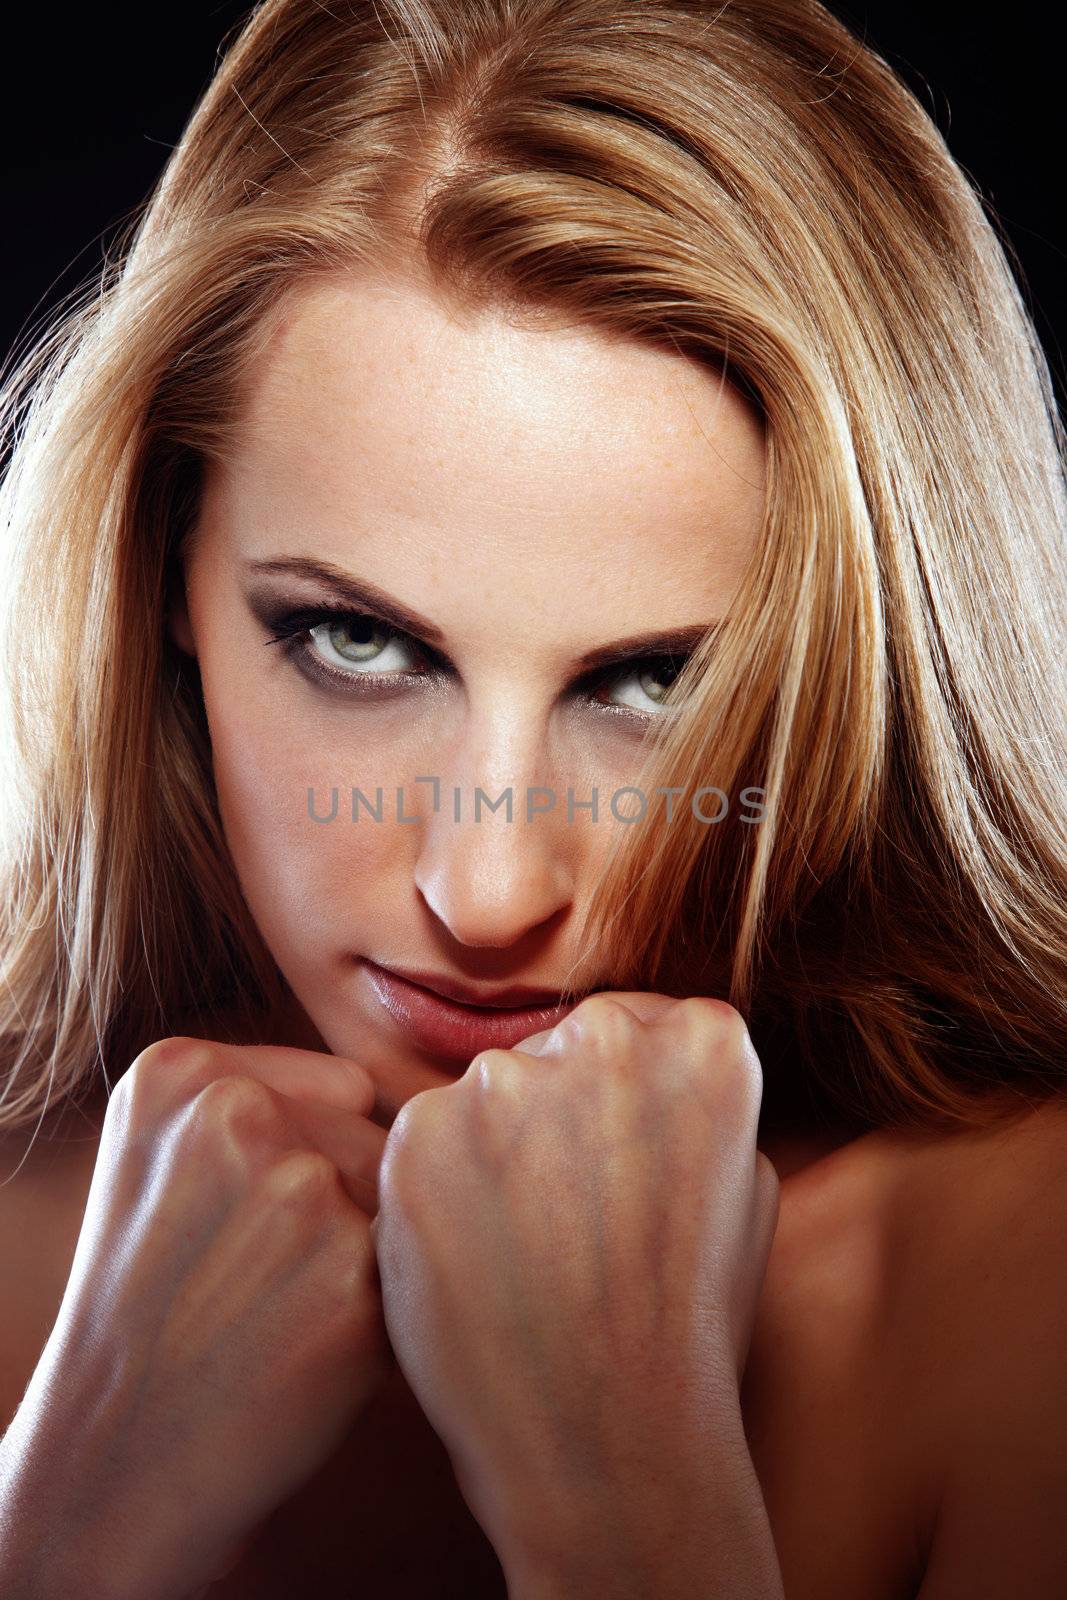 Beautiful lady with clinched fists protecting herself as a symbol of woman's right